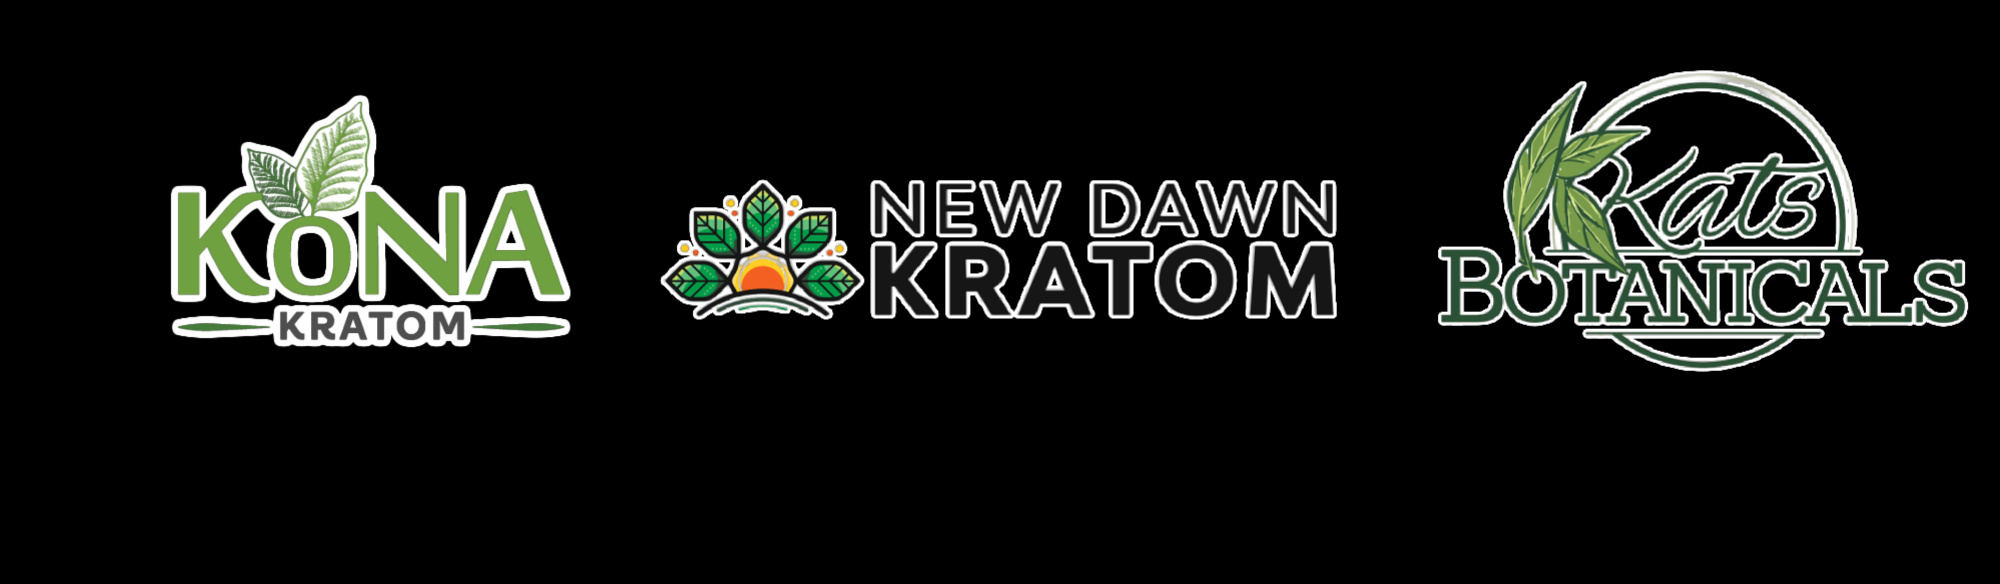 image of reputable online shops that sell kratom